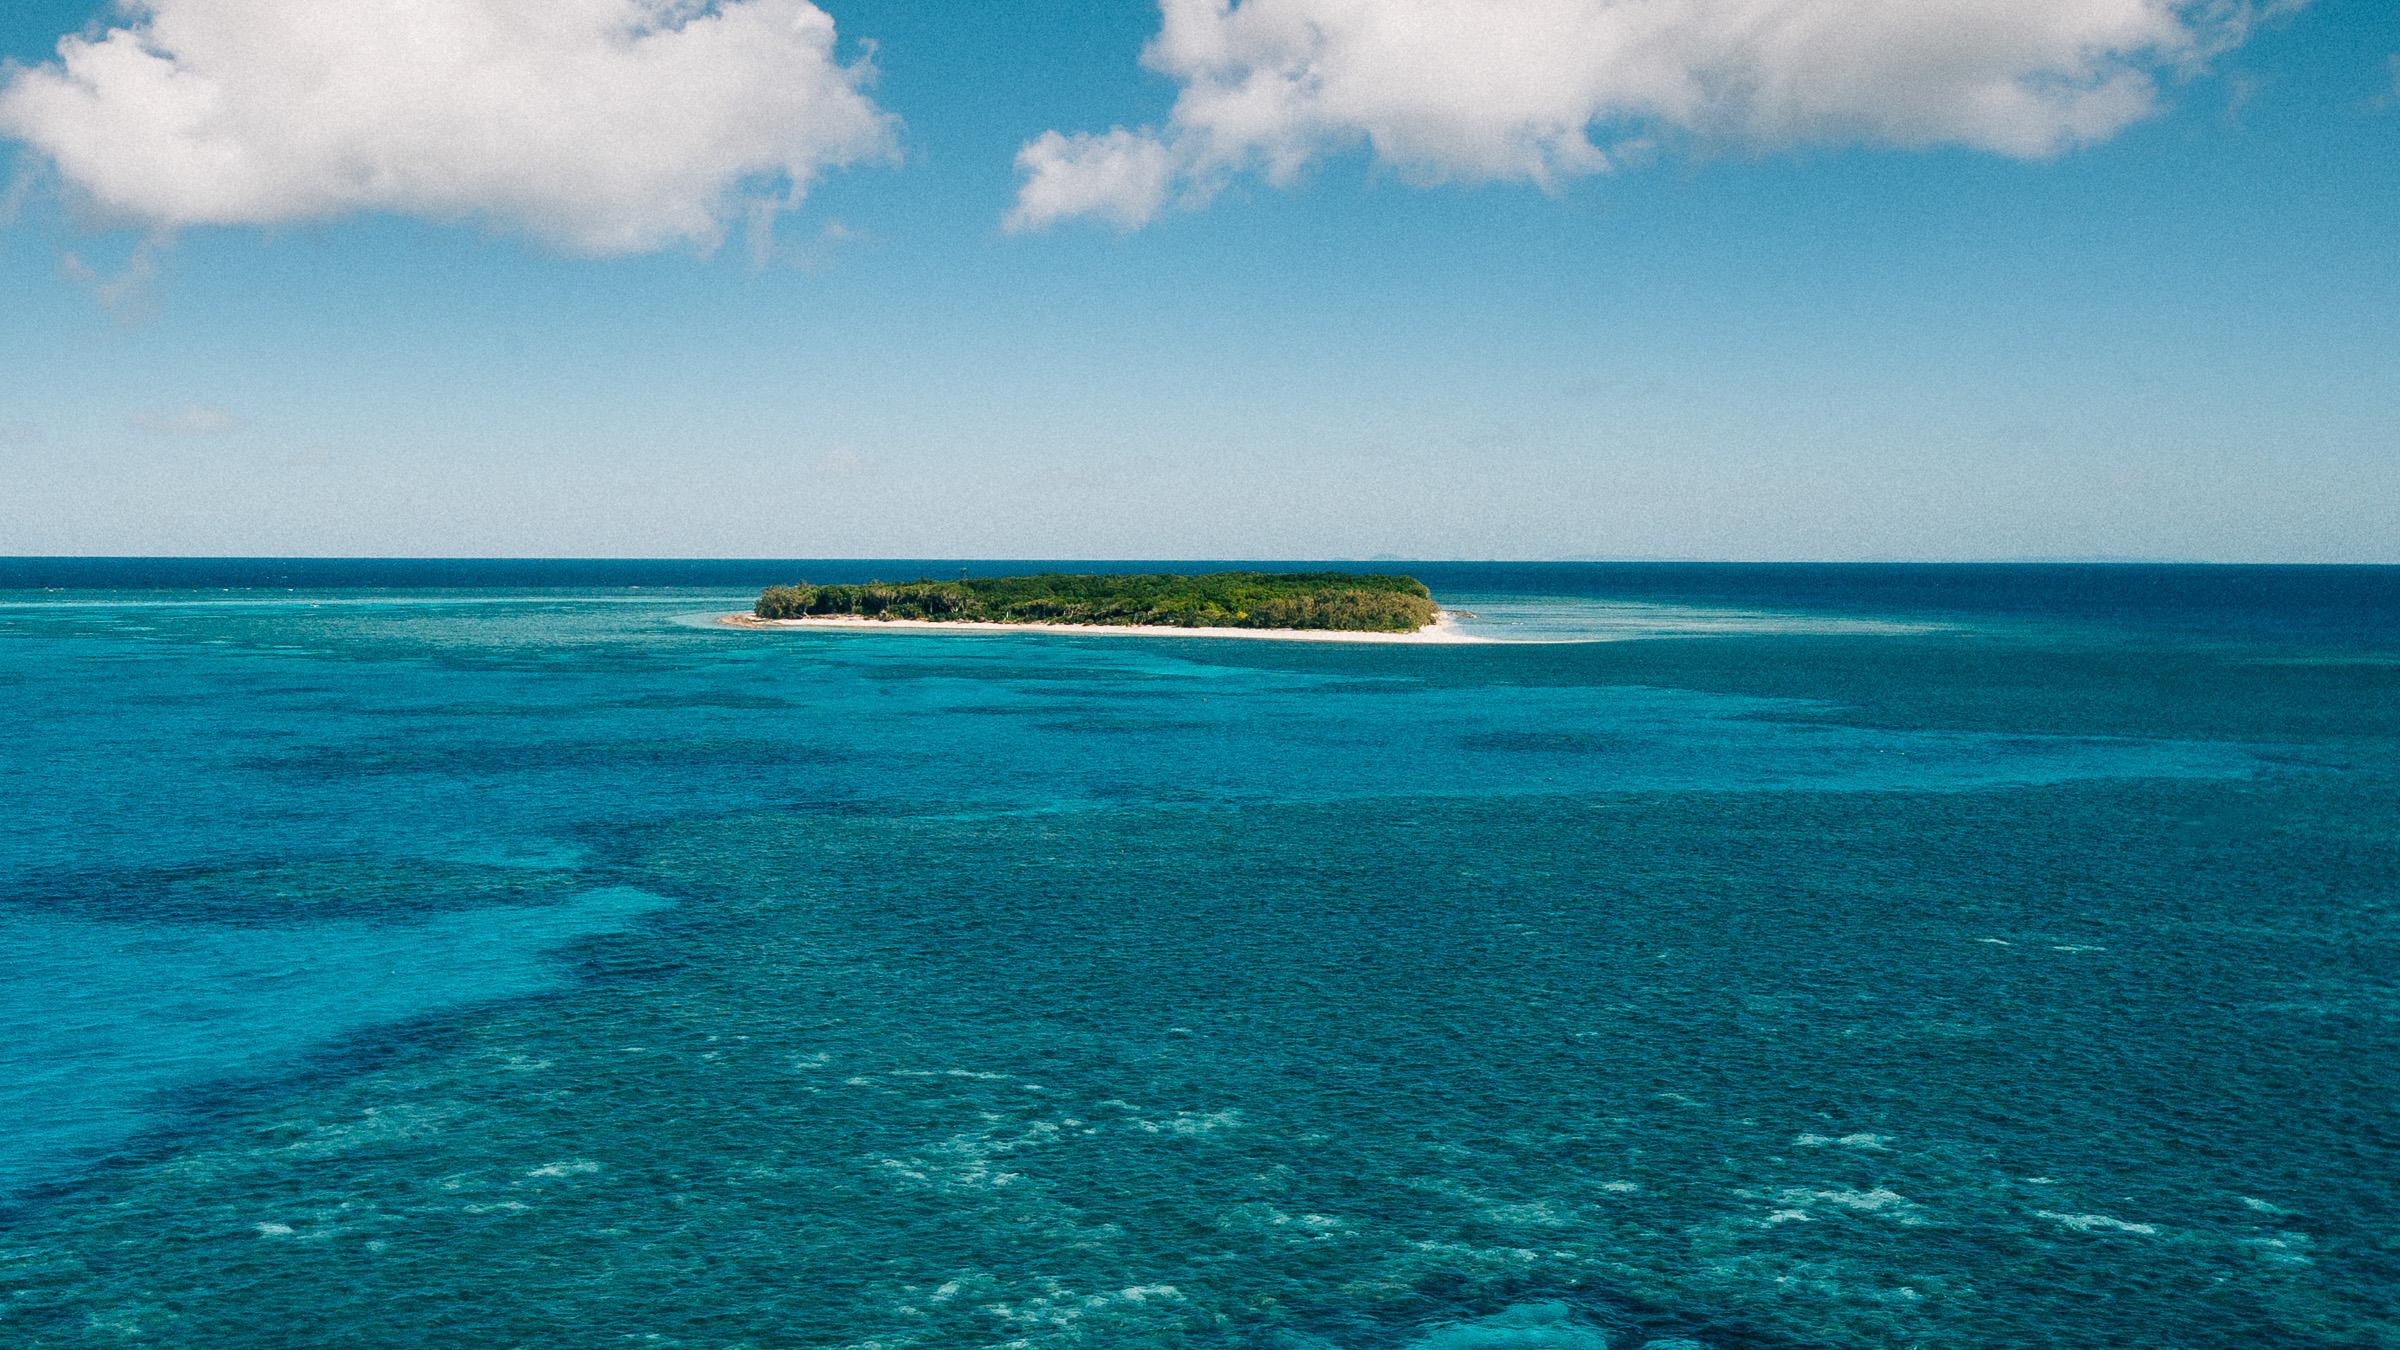 Lady Musgrave Island surrounded by the bright blue waters of the Great Barrier Reef